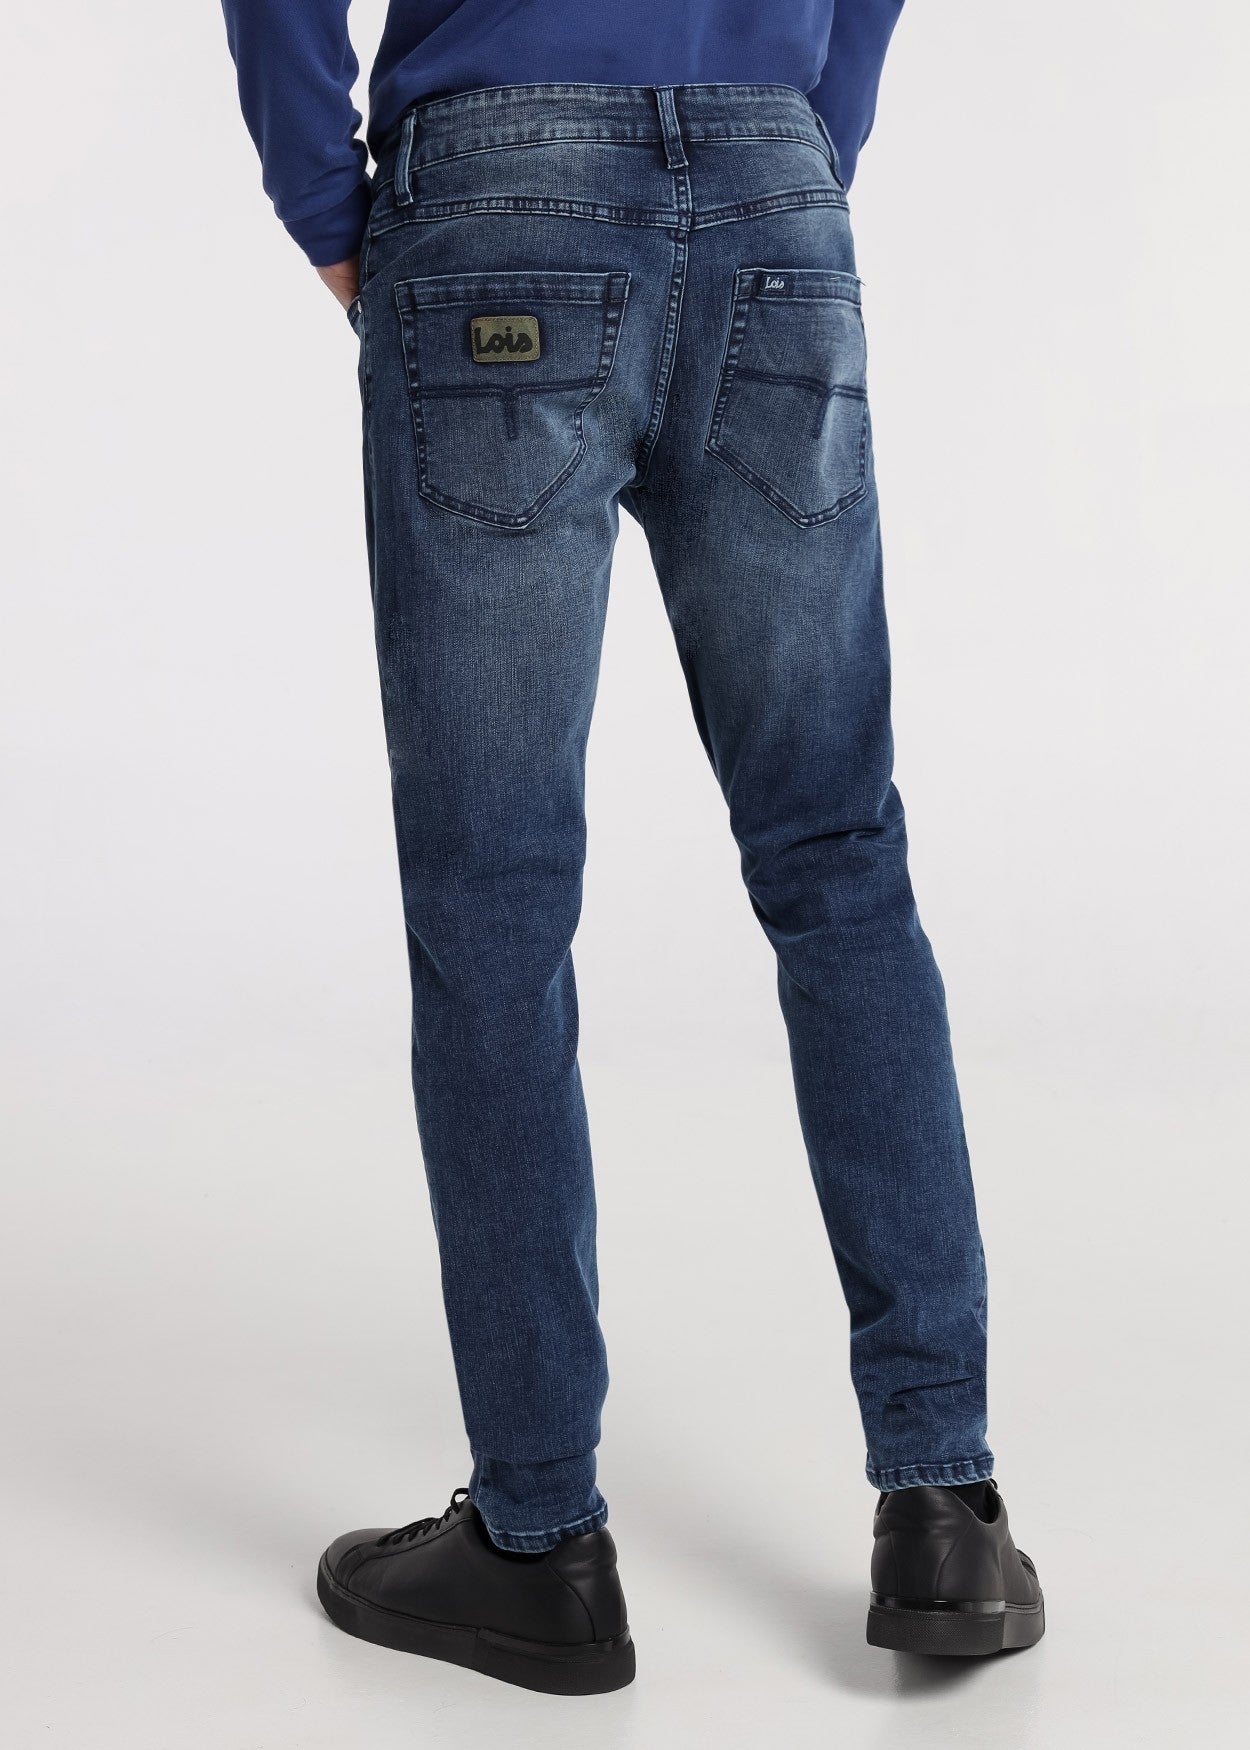 Jeans Lois Billy Tex